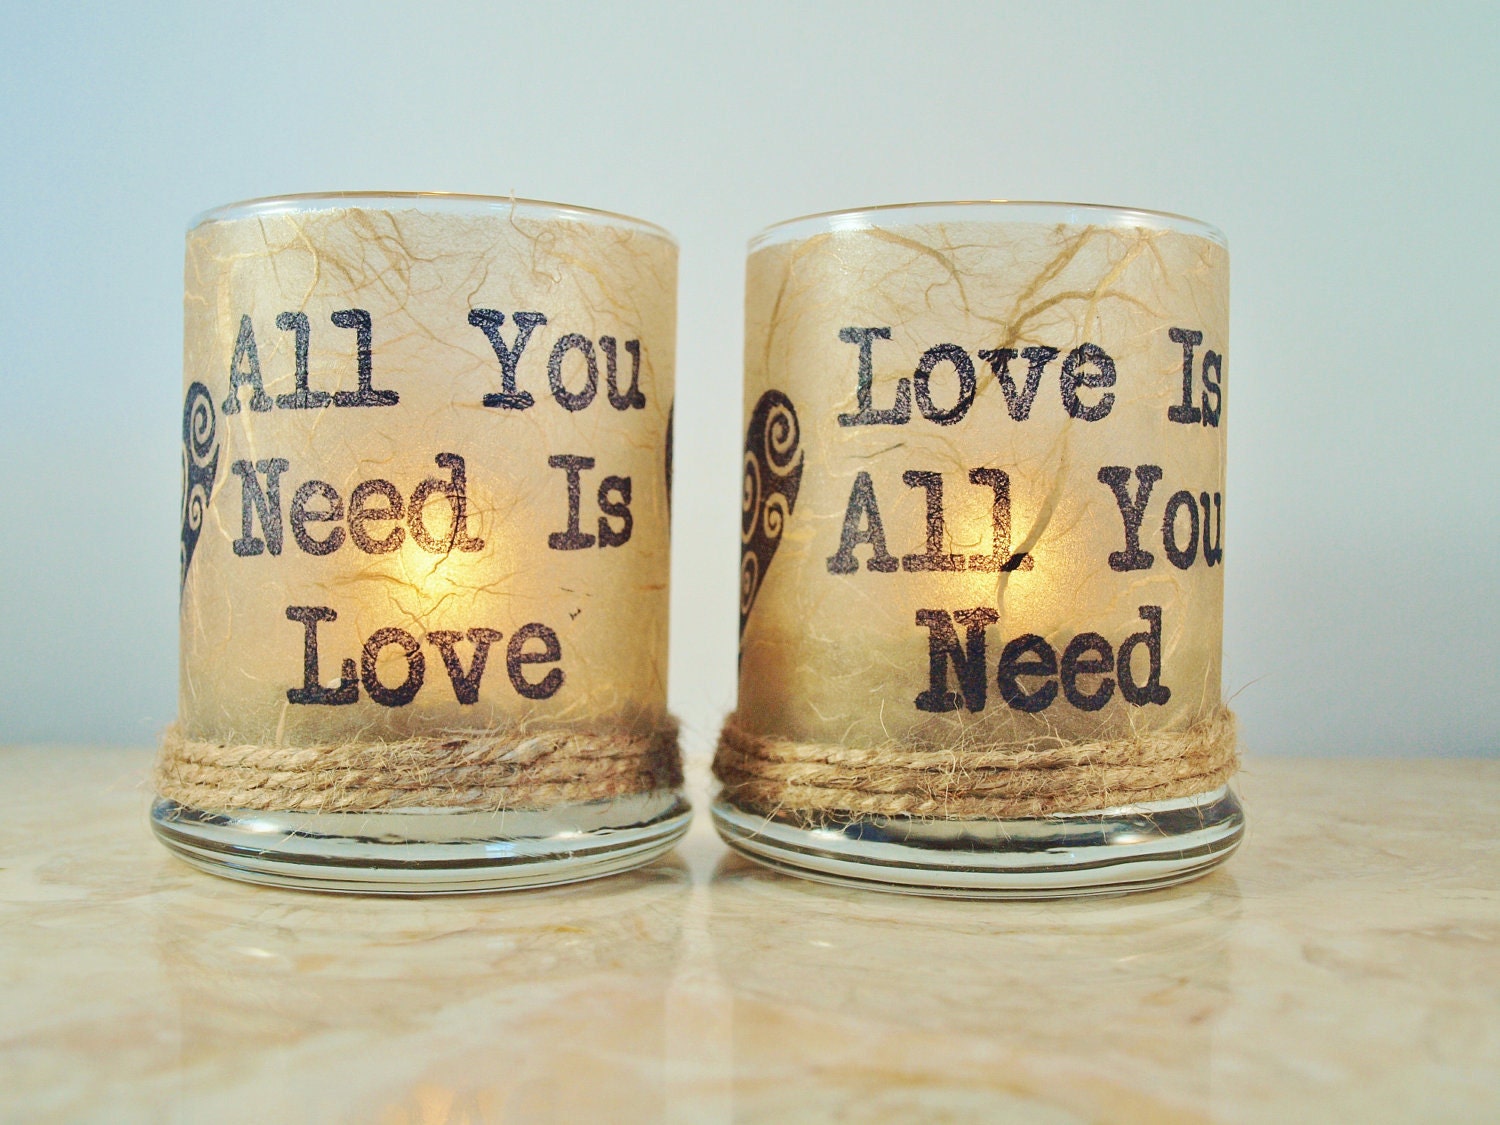 2 Candle Holders "All You Need is Love" Beatles, Valentine Gift, Rustic Wedding, by Green Orchid Design Studio - GreenOrchidDS